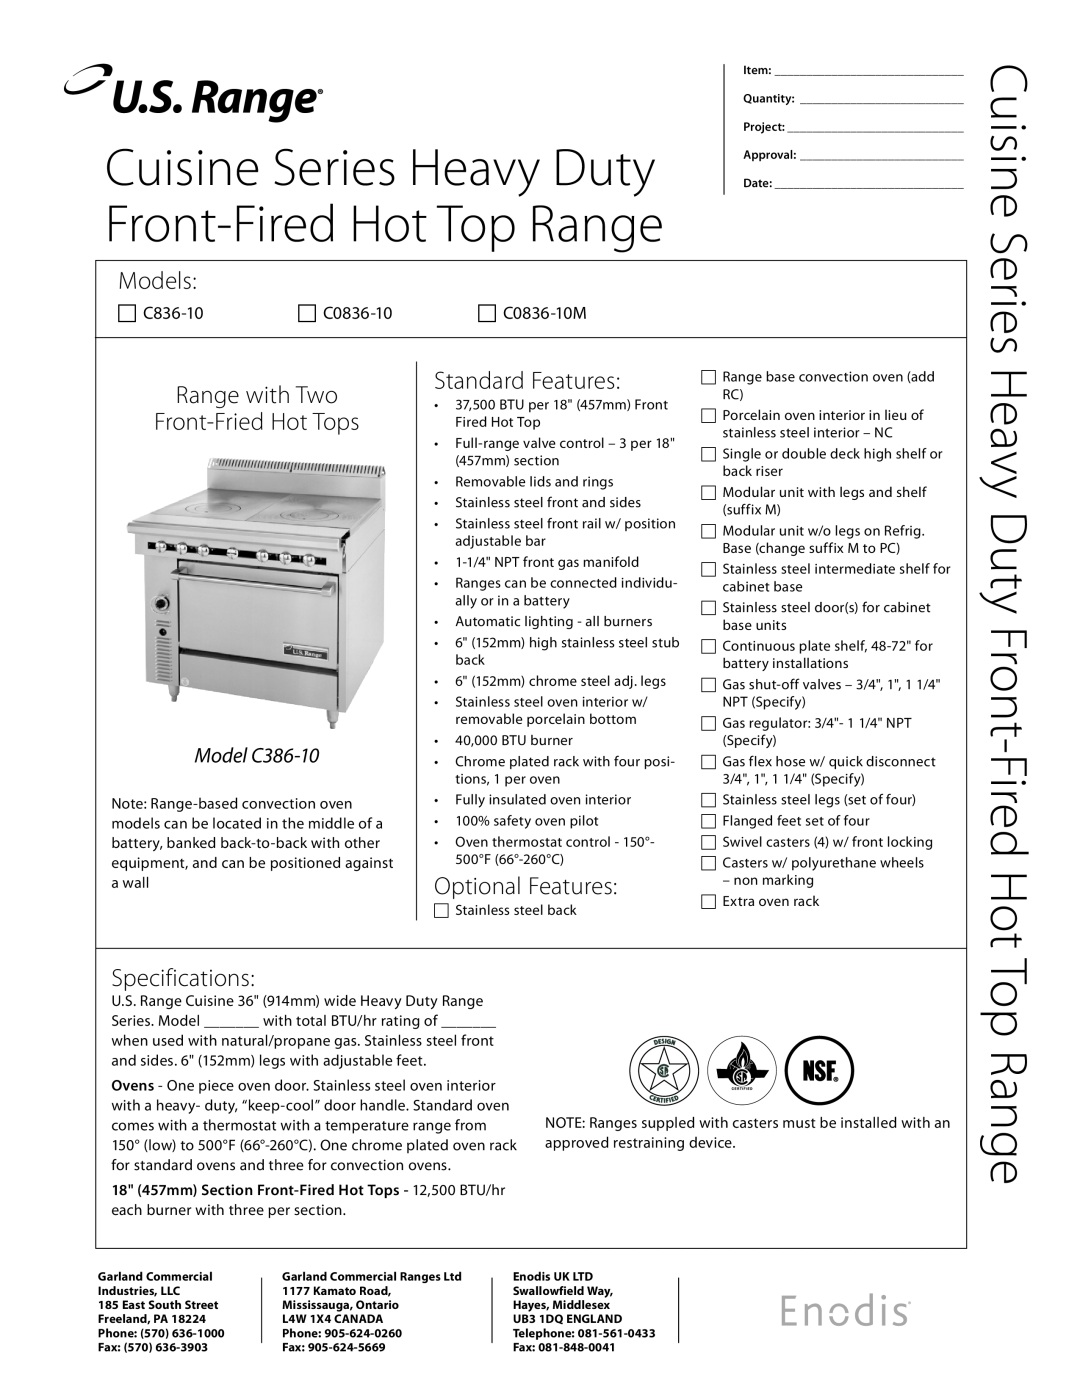 Garland C0836-10 specifications Cuisine Series Heavy Duty, Front-FiredHot Top Range, Heavy Duty Front-FiredHot, Models 